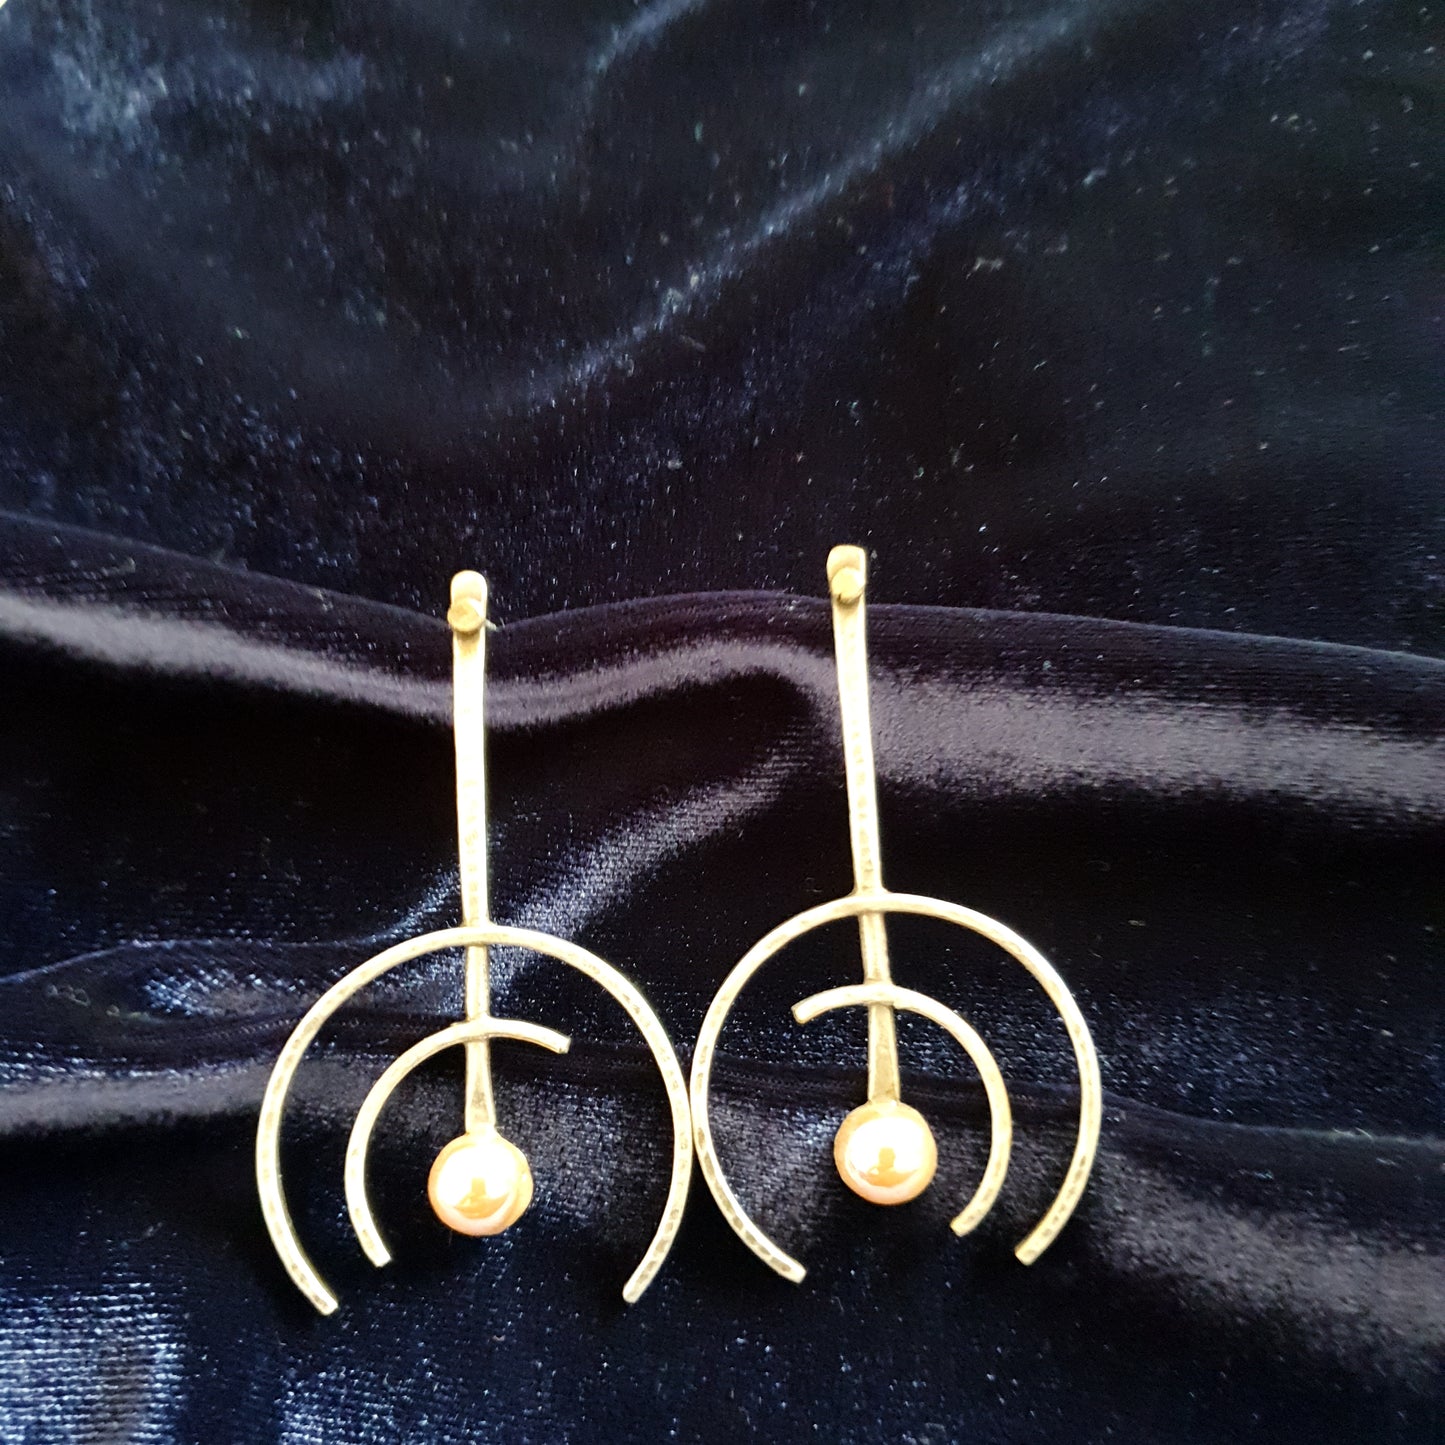 The Dot and Circle Earrings